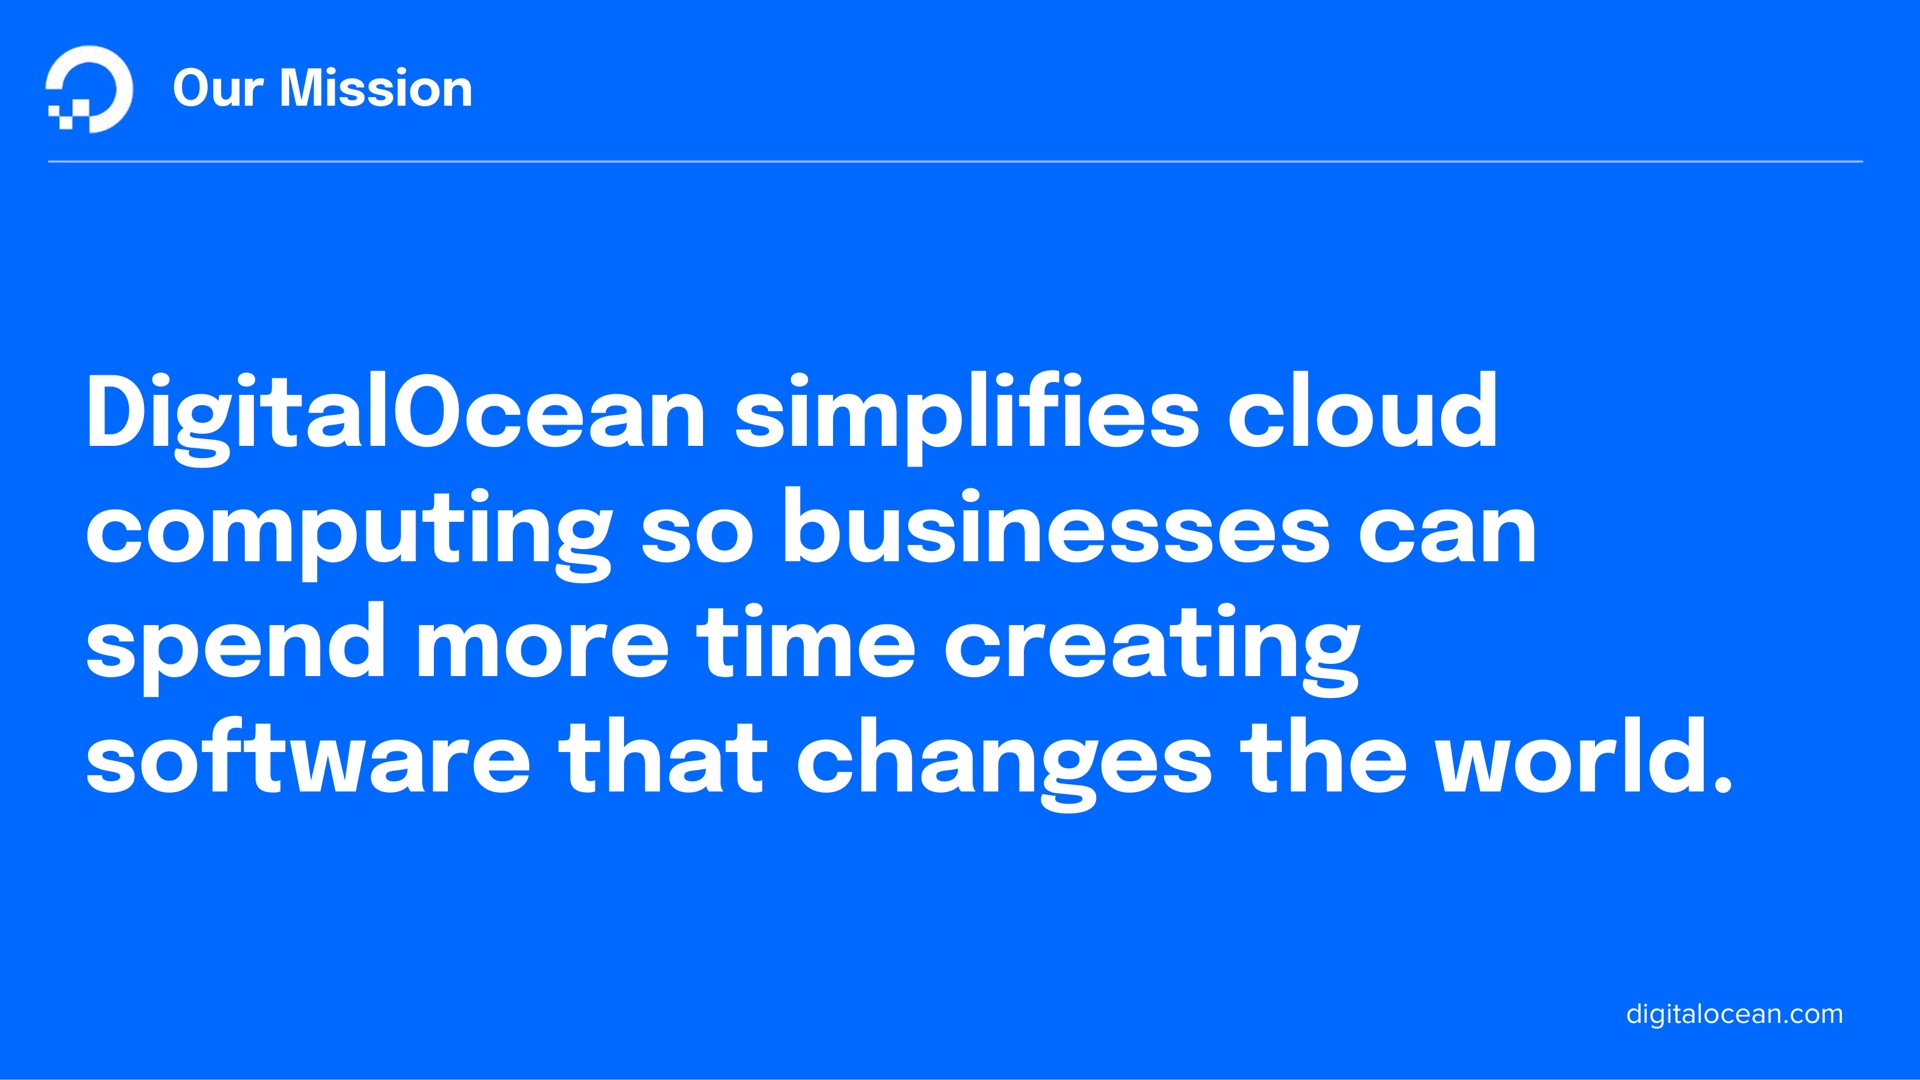 our mission cloud computing so businesses can spend more time creating that changes the world simplifies | DigitalOcean